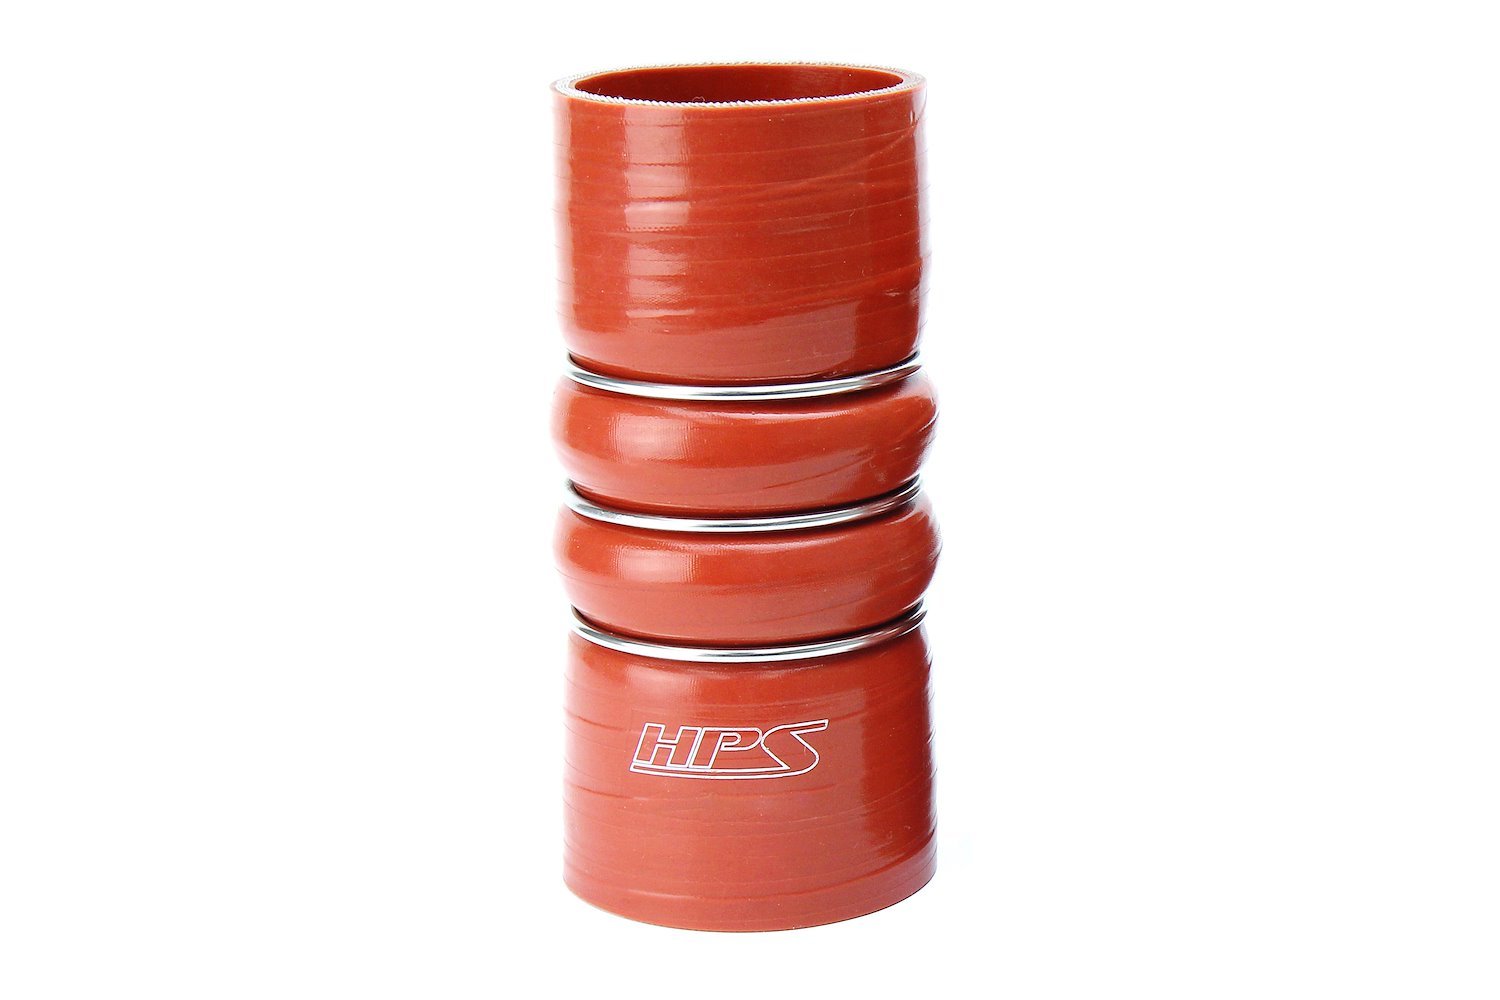 P8-CAC-800-L8-HOT Silicone CAC Hump Hose Hot, High-Temp 8-Ply Aramid Reinforced, 8 in. ID, 8 in. Long